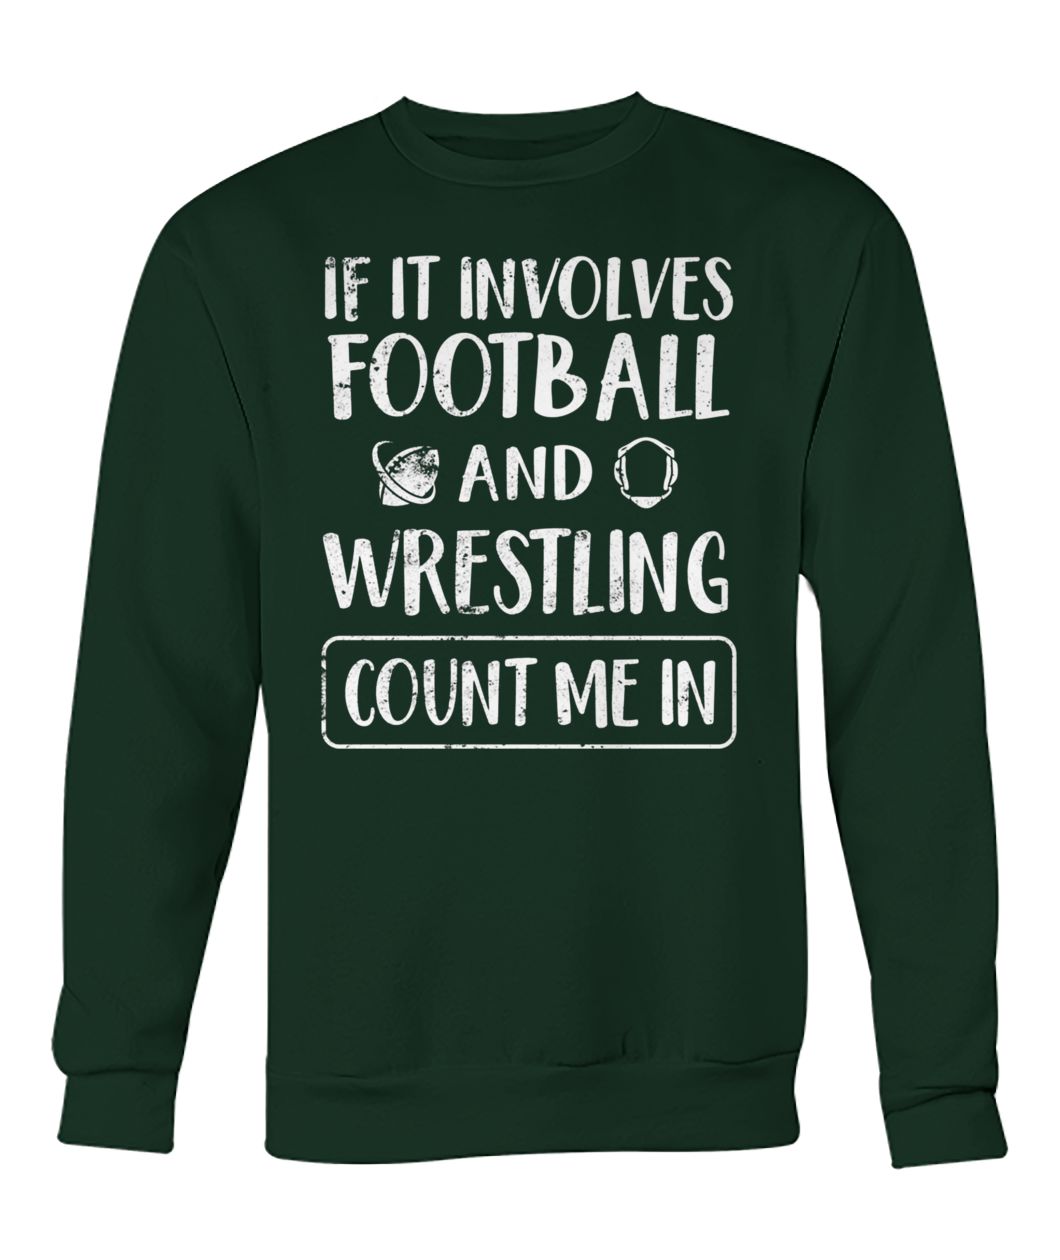 If it involves football and wrestling count me in crew neck sweatshirt